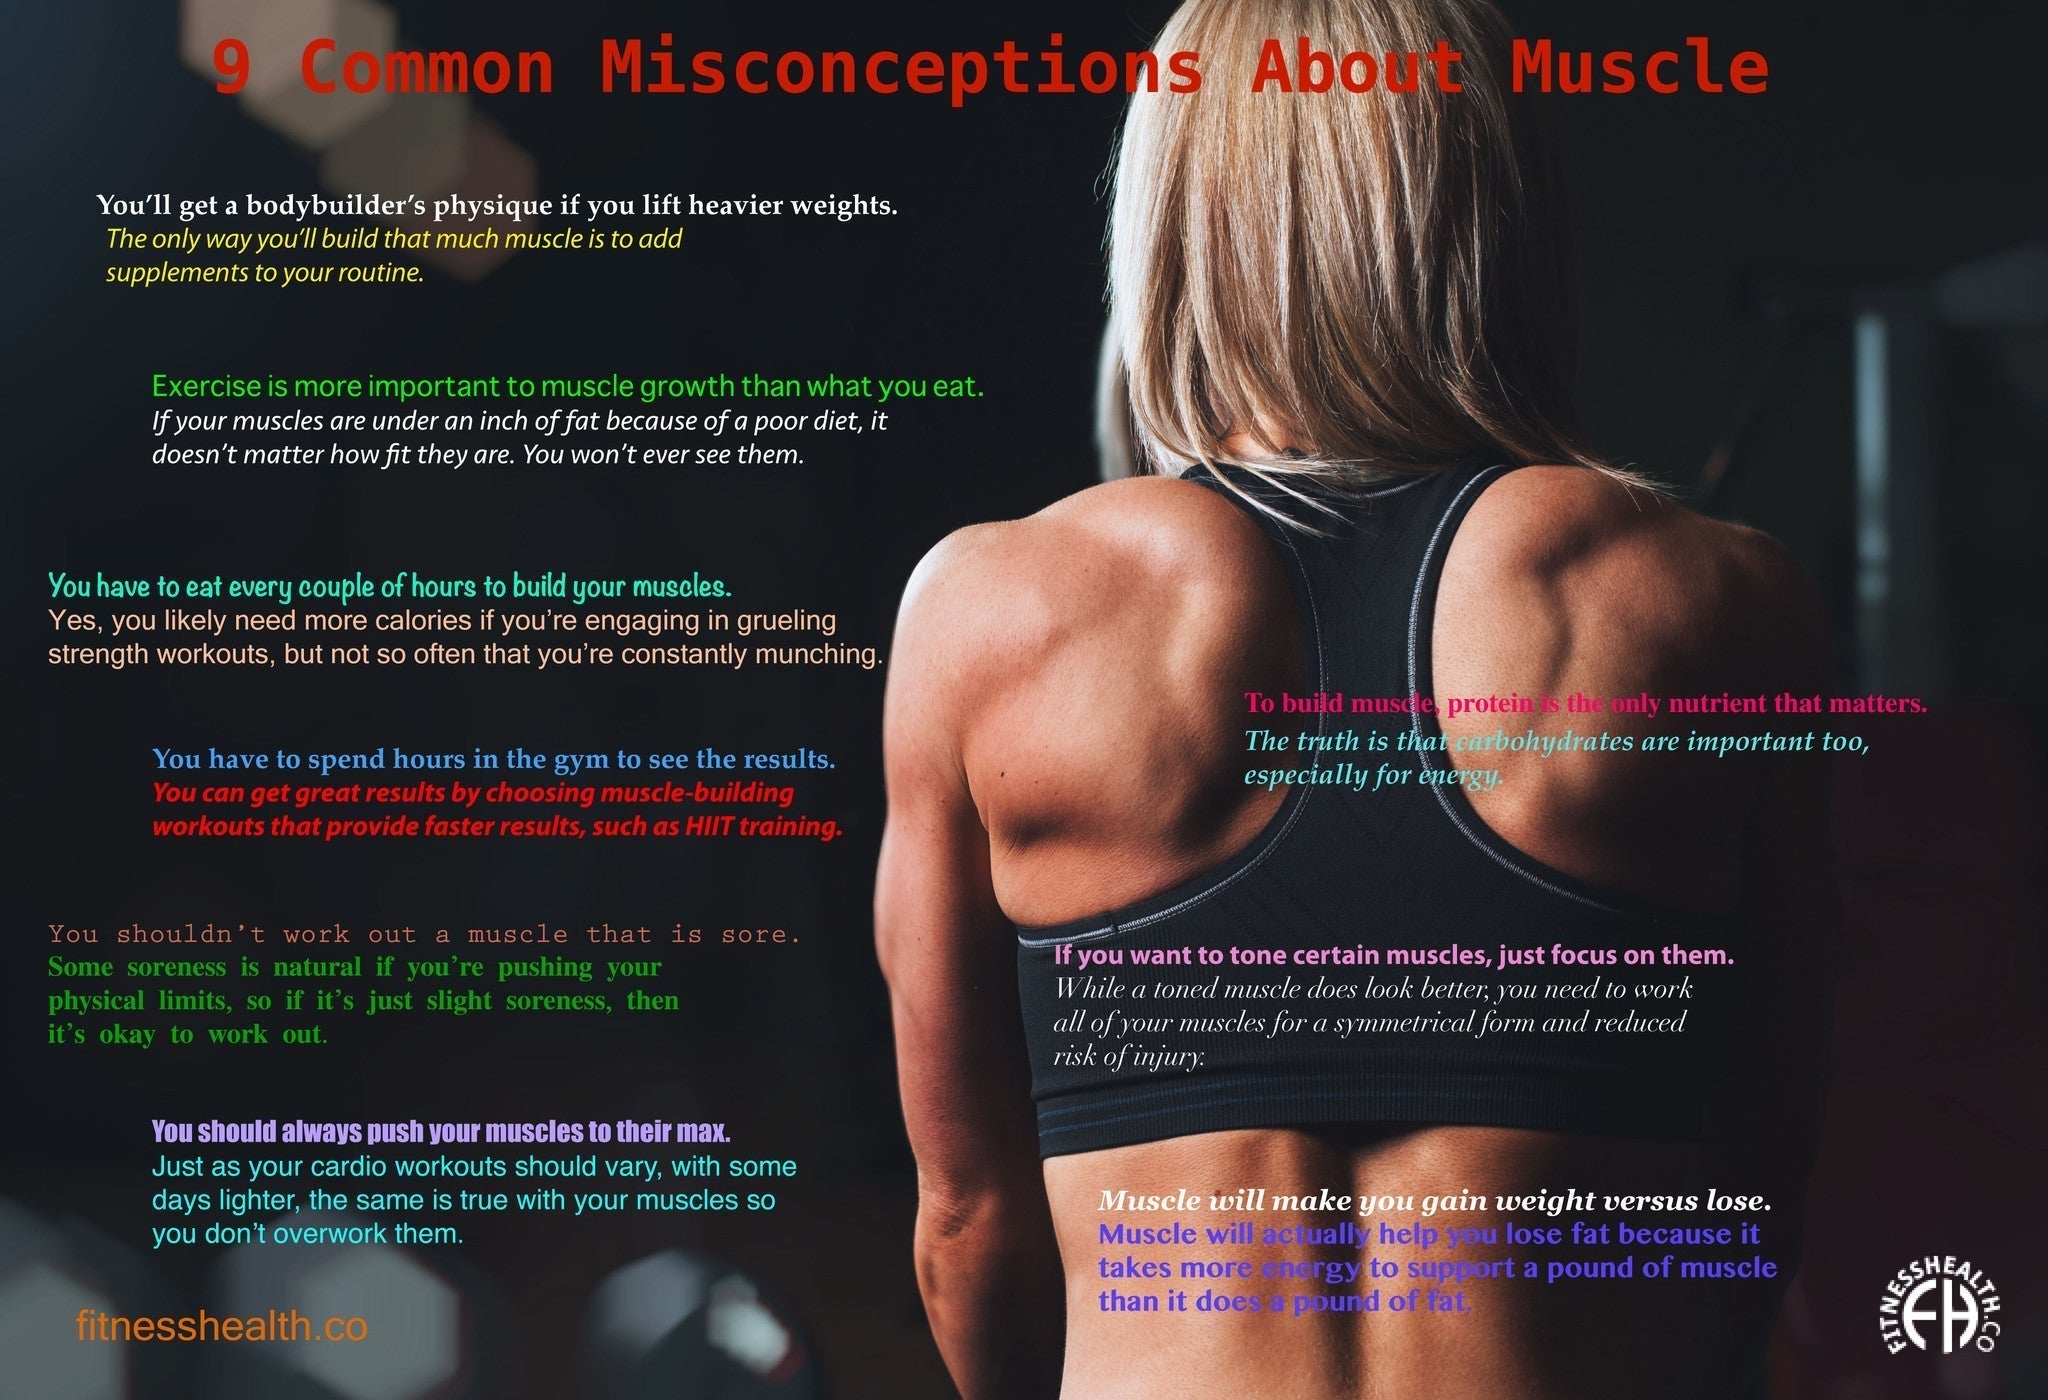 What It Actually Means to 'Tone' Your Muscles